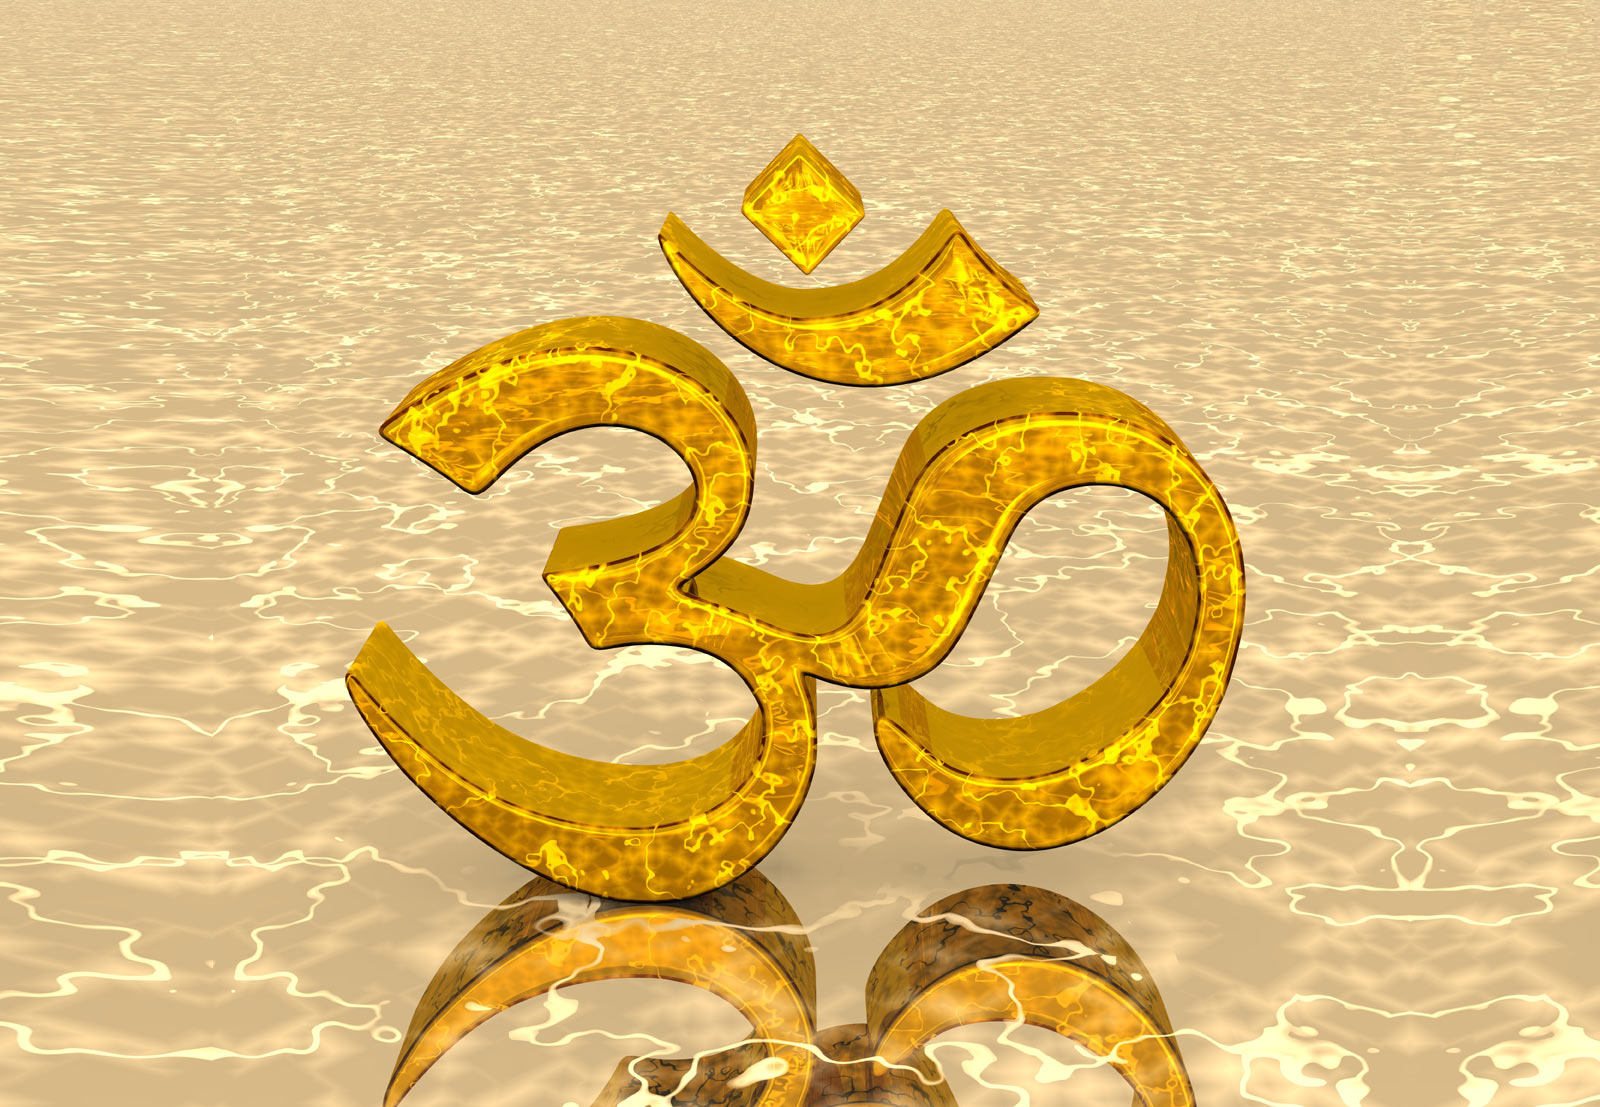 Om HD Wallpapers with Om Namah Shivaya Mantra Meaning Images God